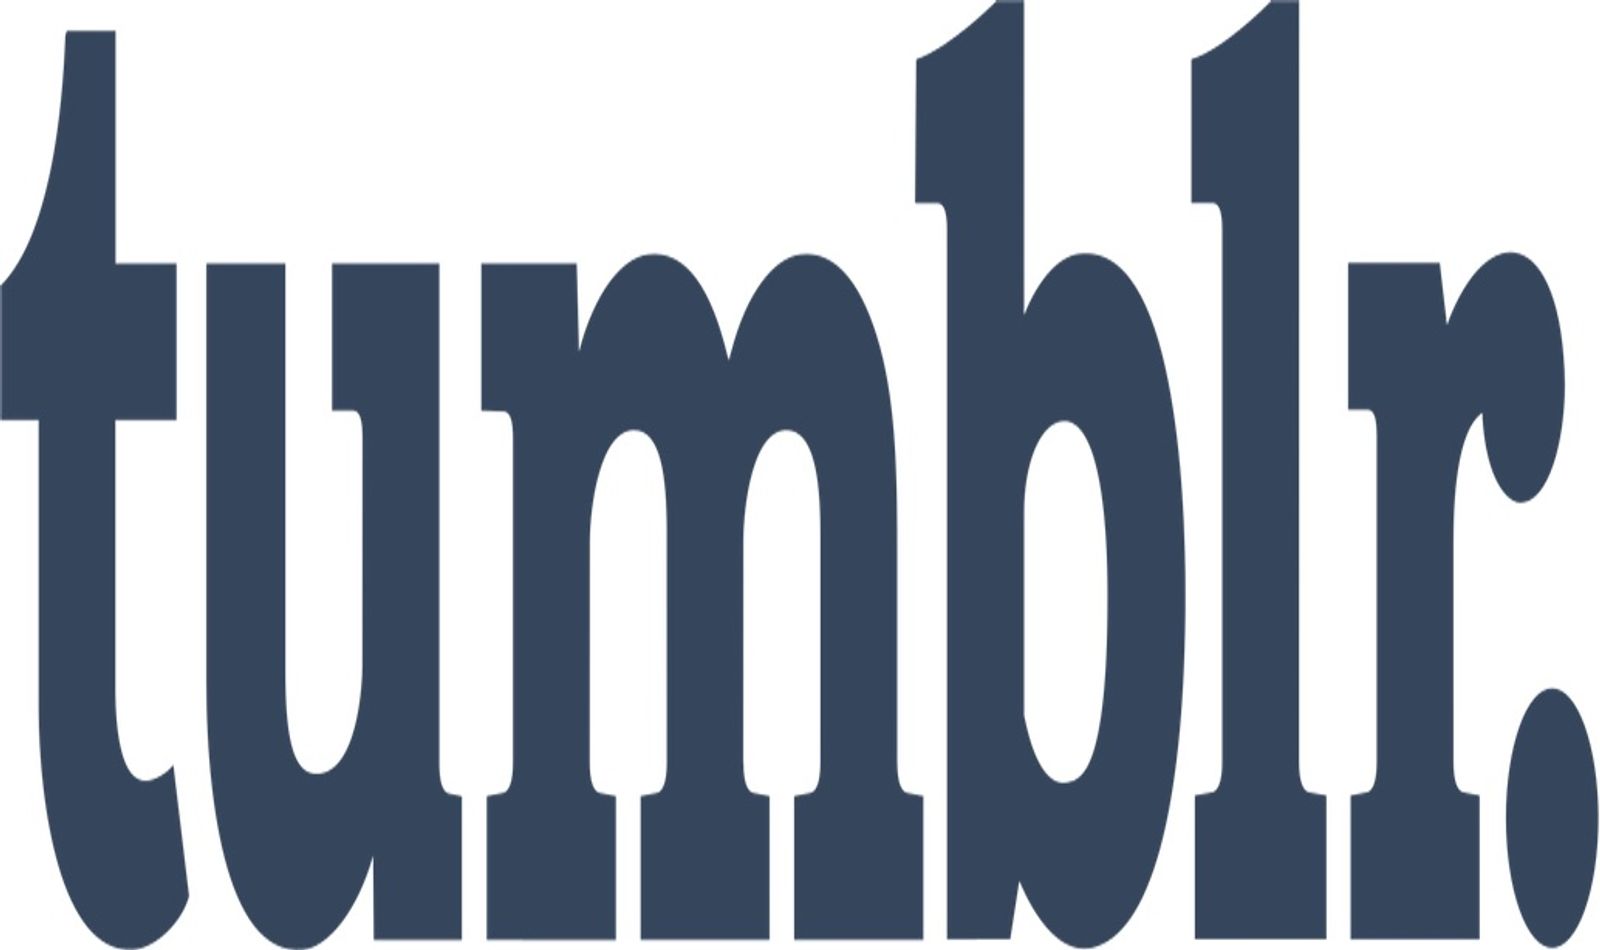 Tumblr Traffic Plunged 30 Percent Since Porn Ban Was Announced